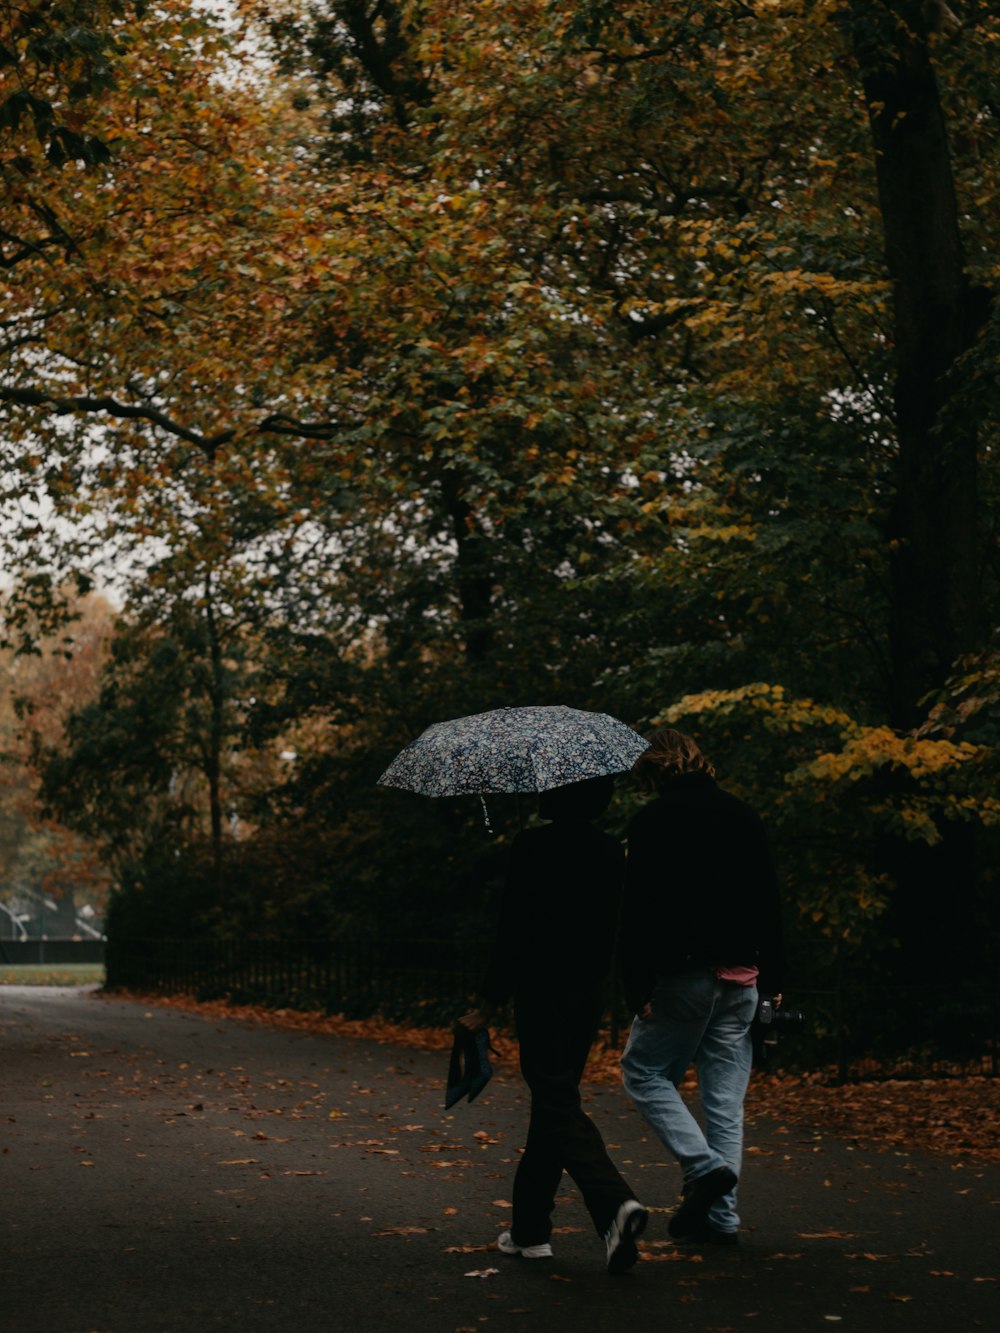 two people walking down a road holding umbrellas